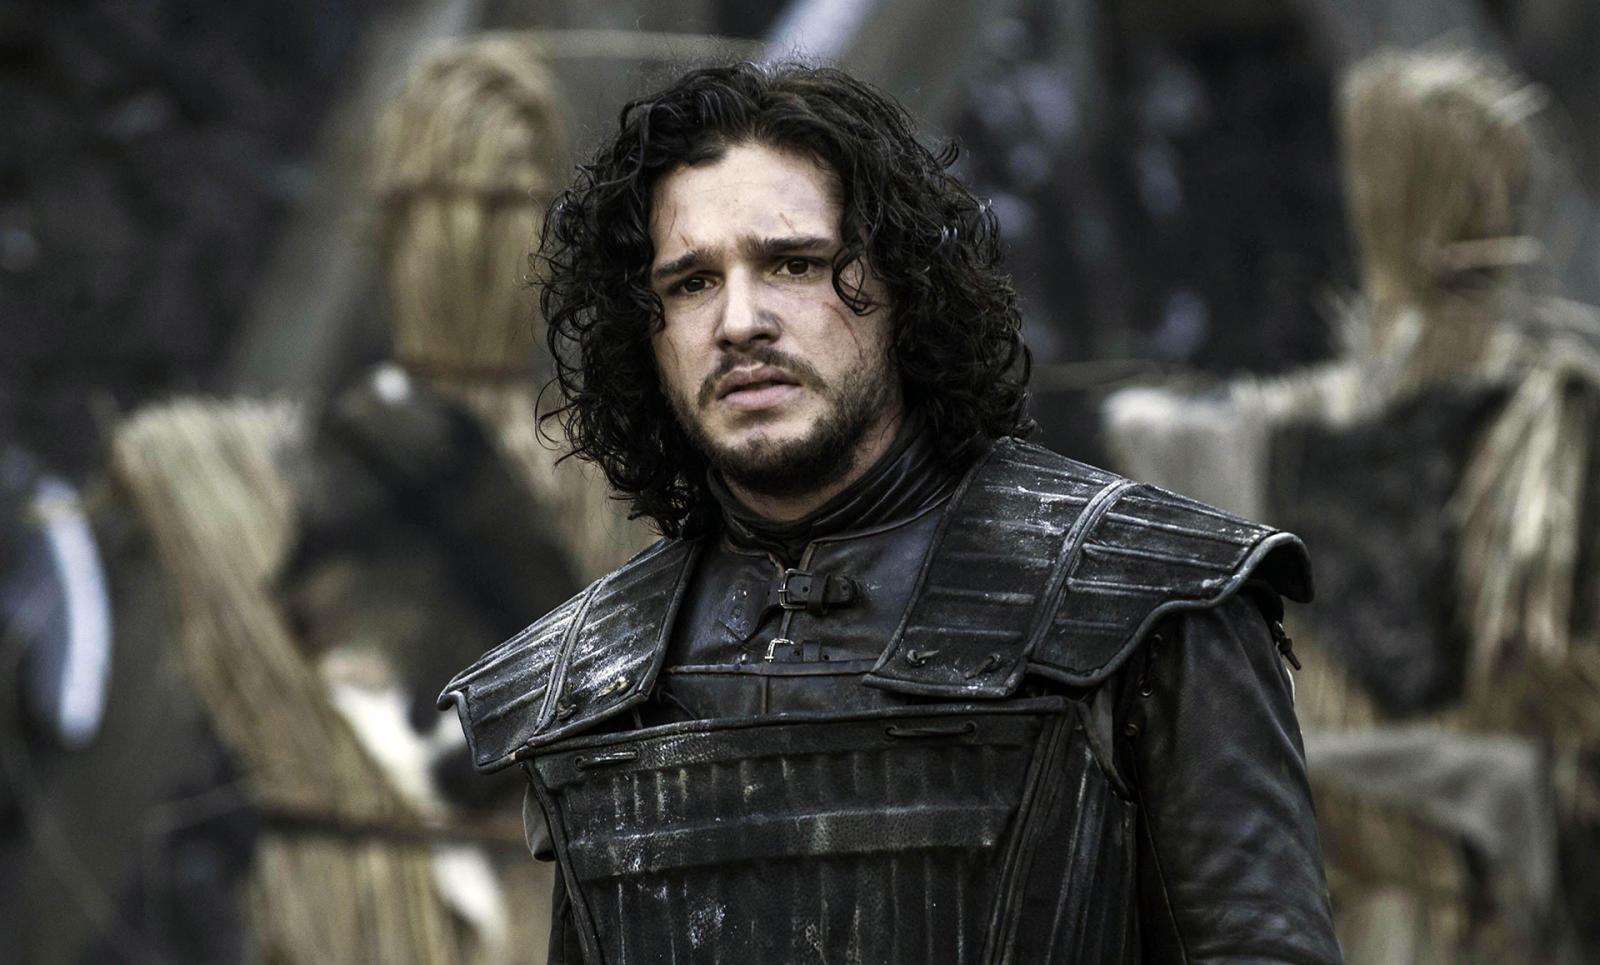 From X-Files to Game of Thrones: TV Shows Created 8 of the Sexiest Men in Hollywood - image 1